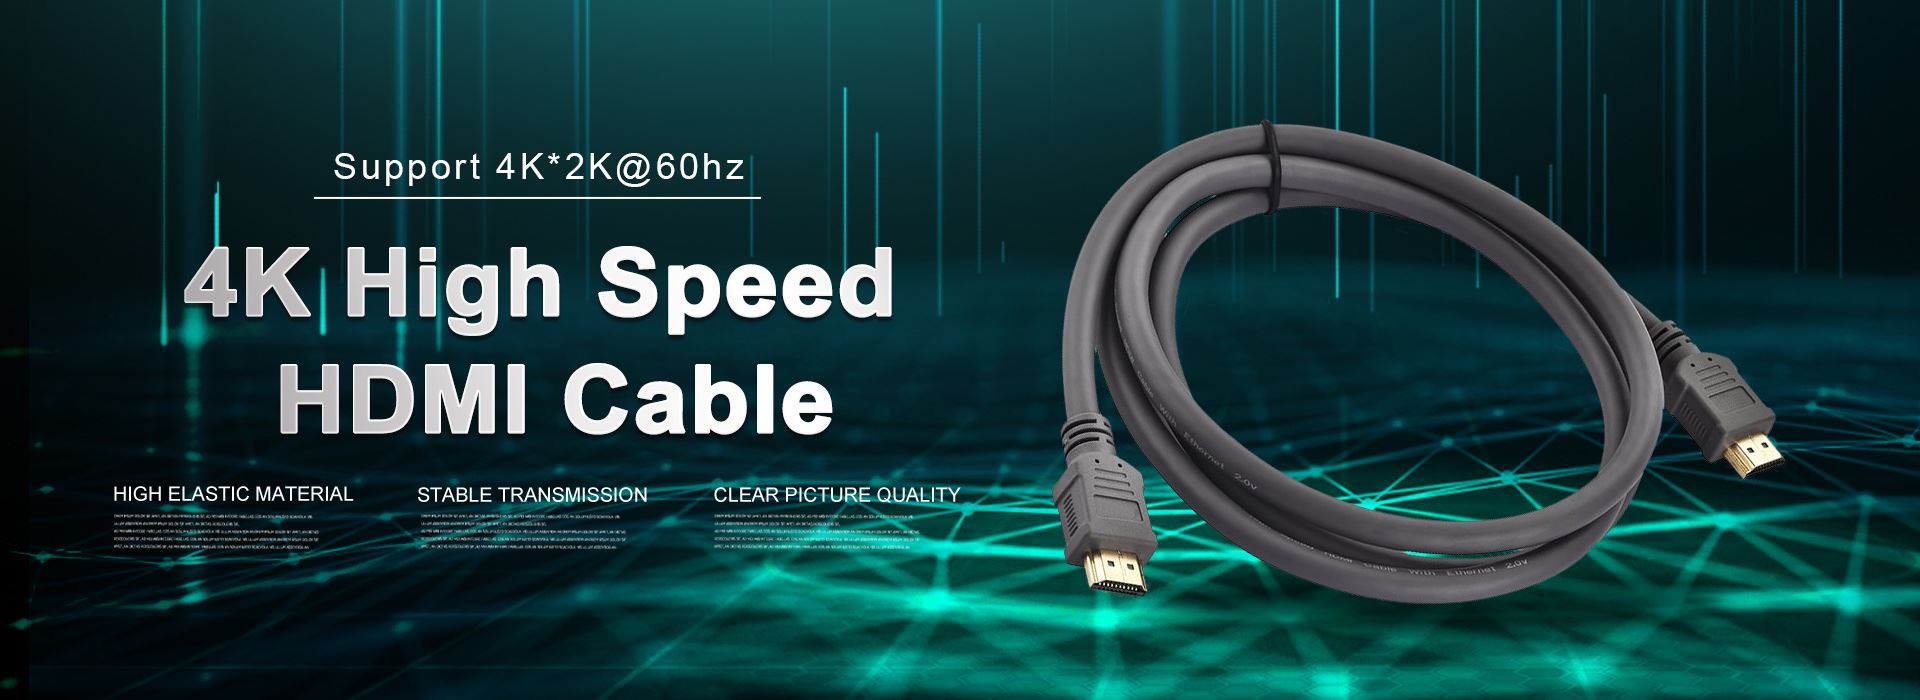 4K High Speed HDMI Cable